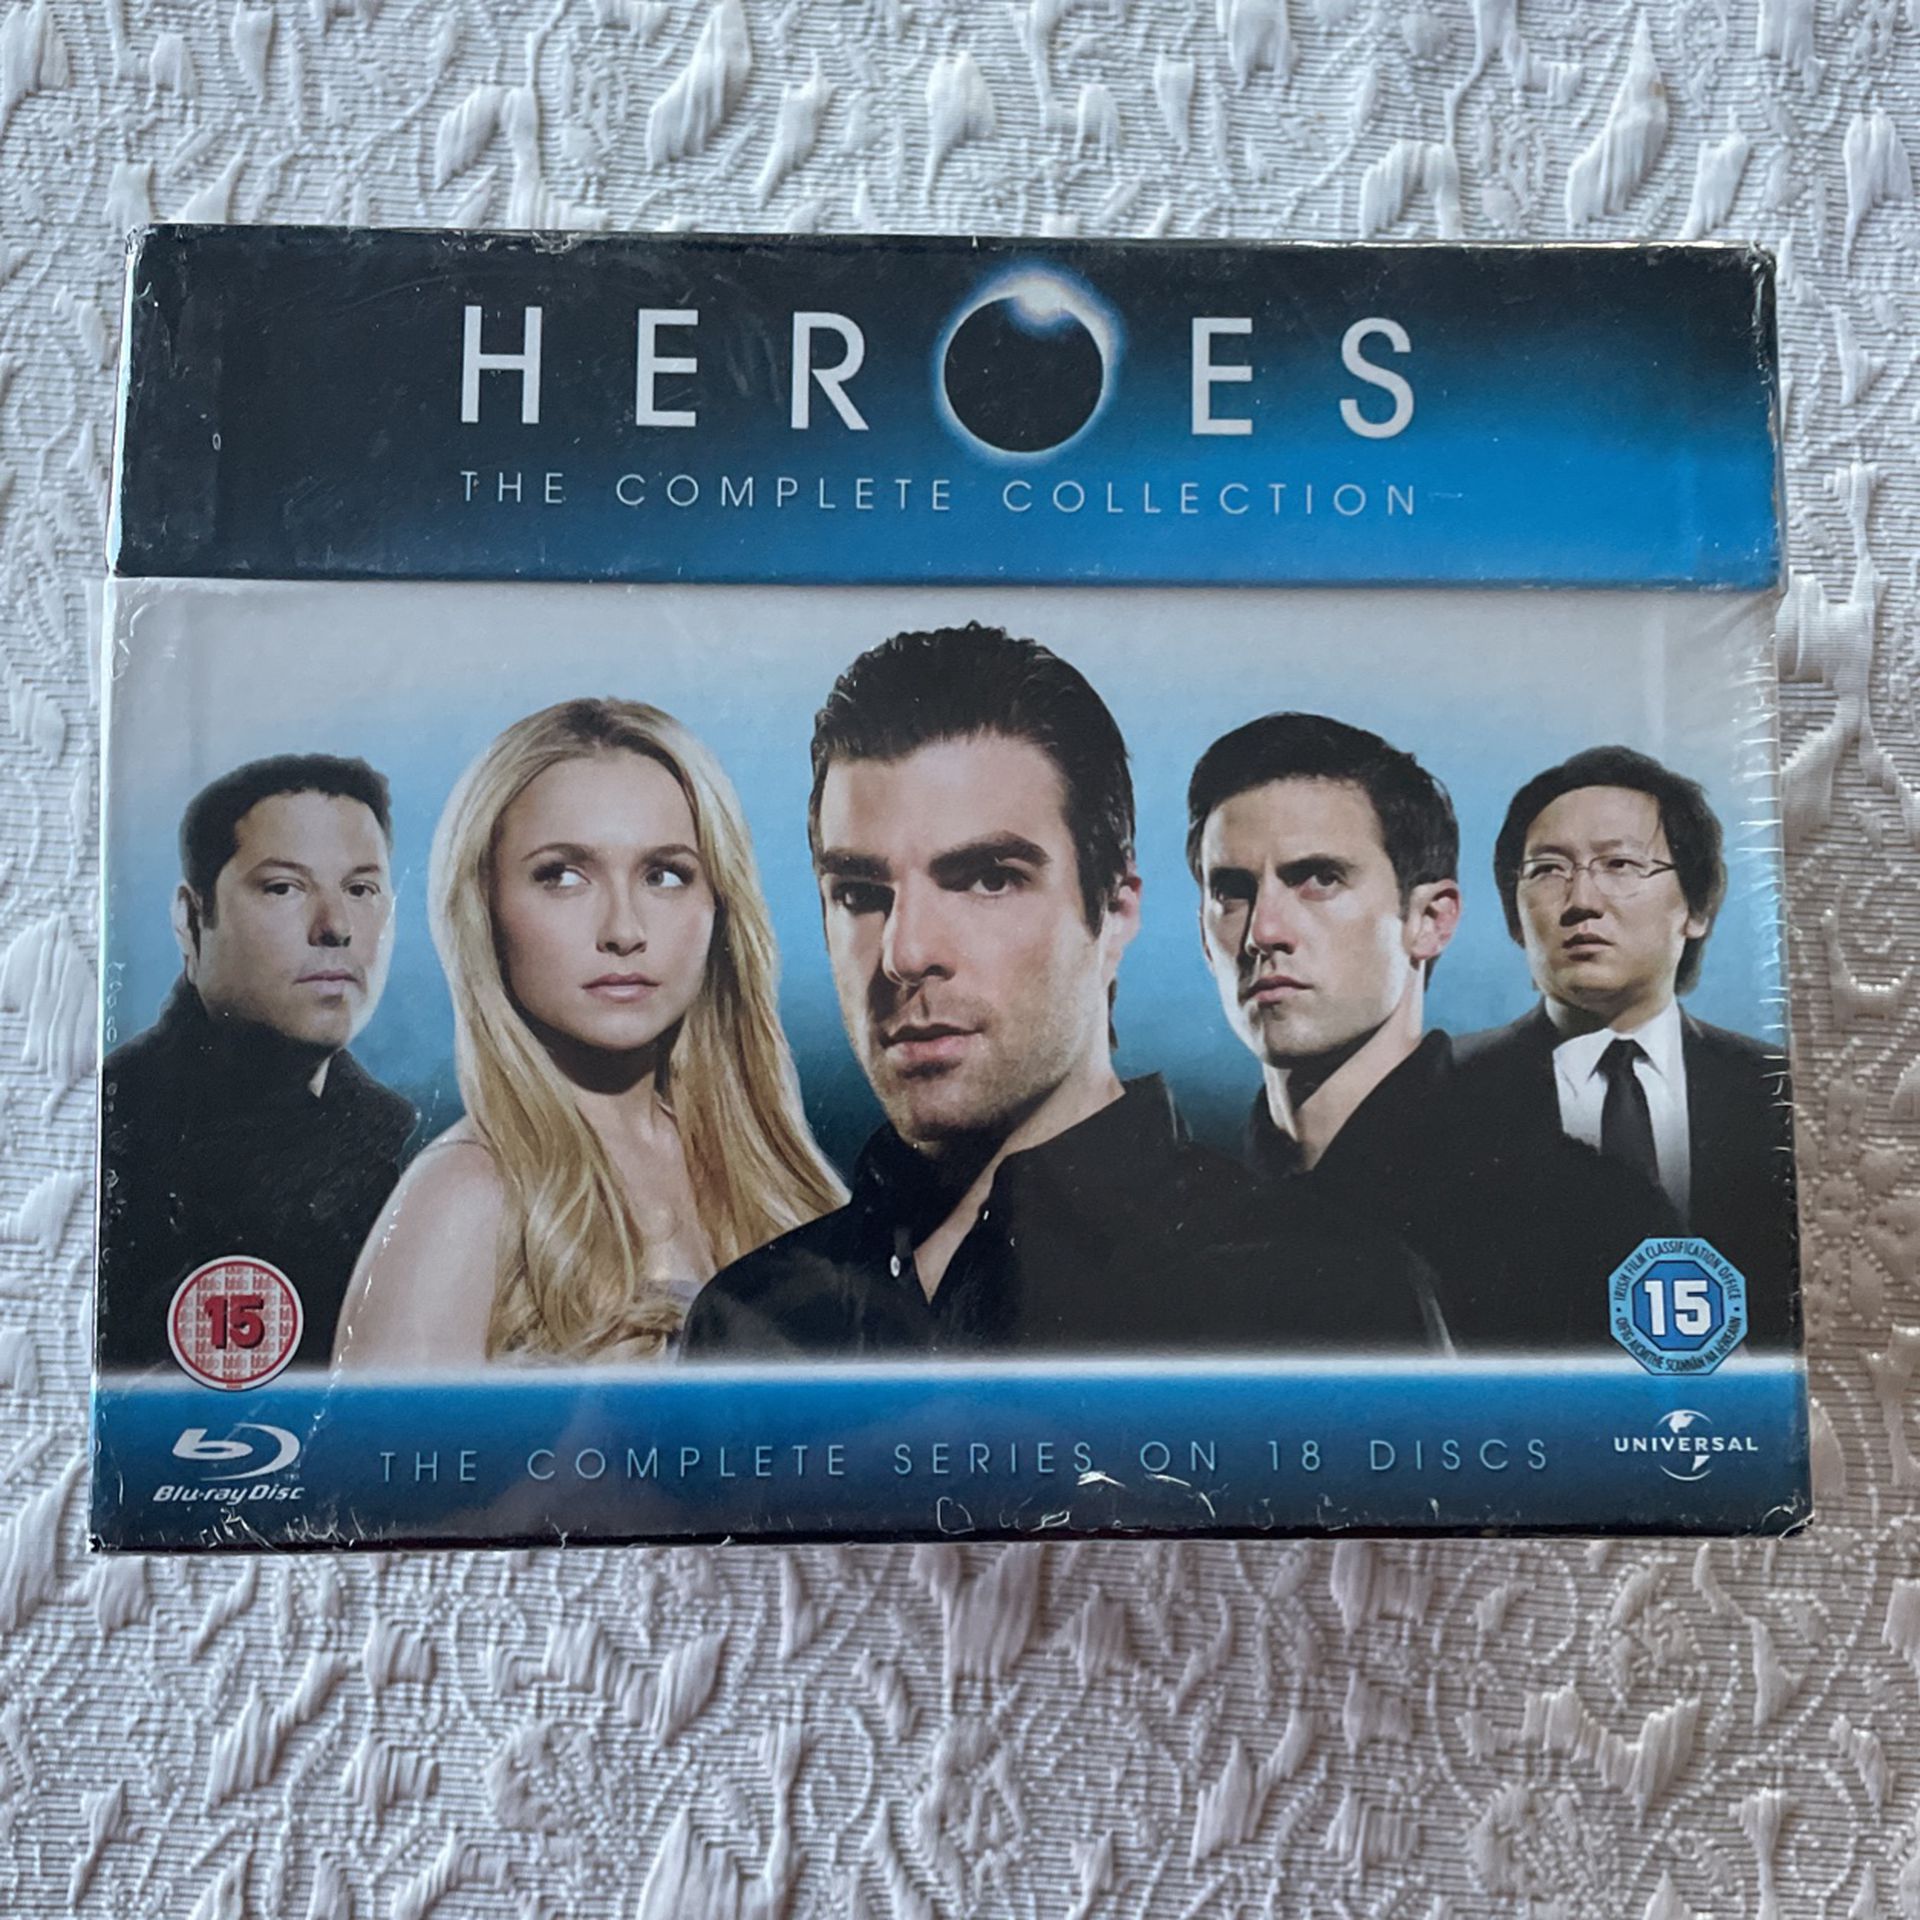 Hero’s The Complete Collection